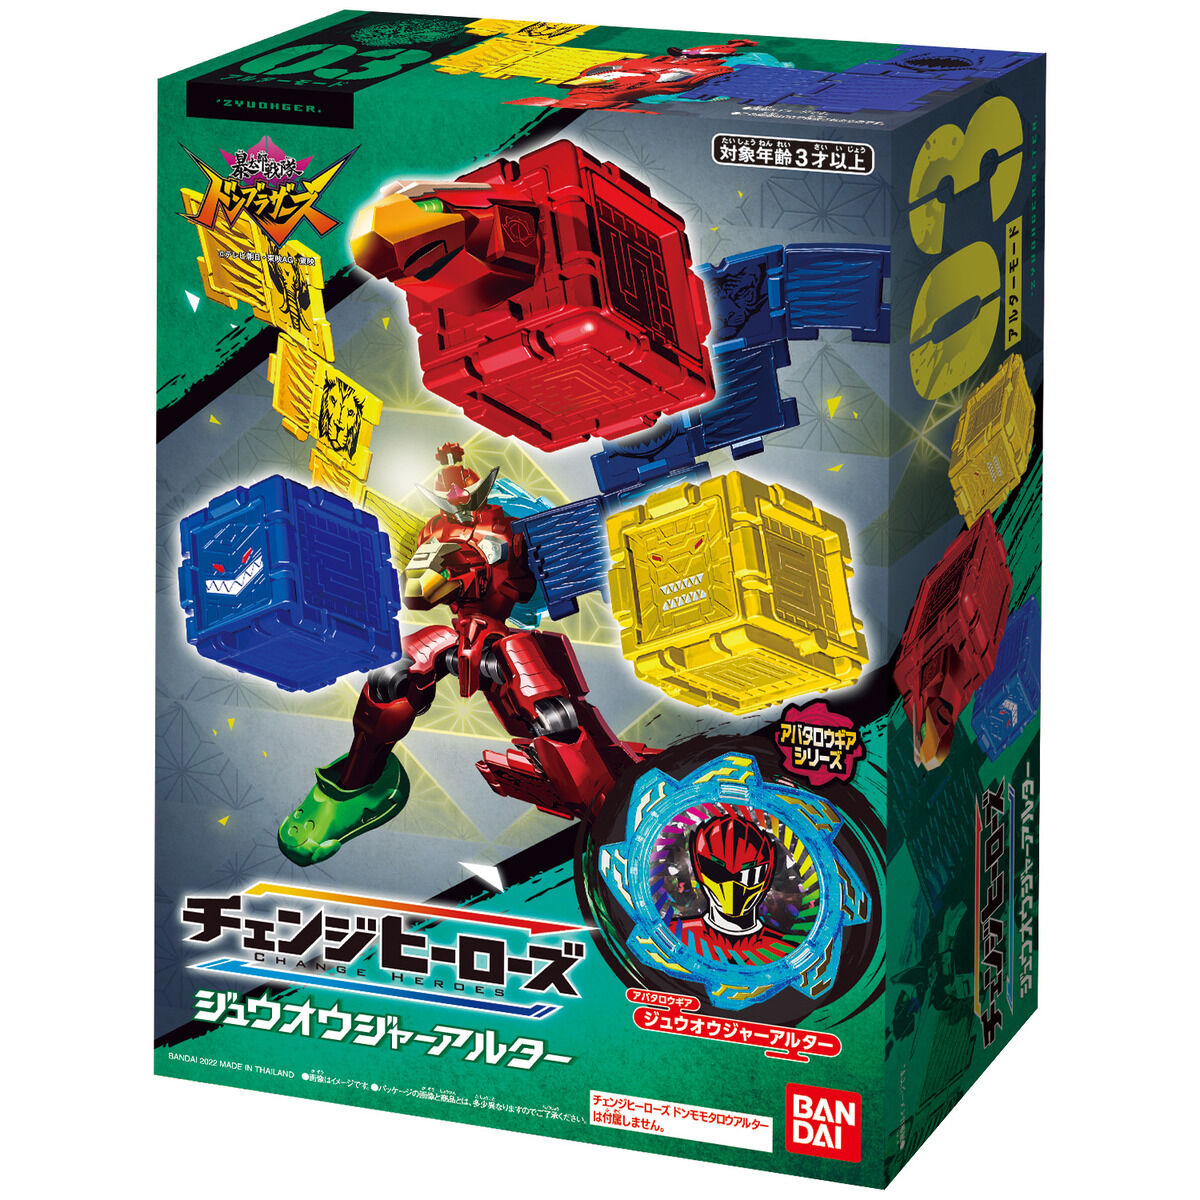 Change Heroes Zyuohger Alter